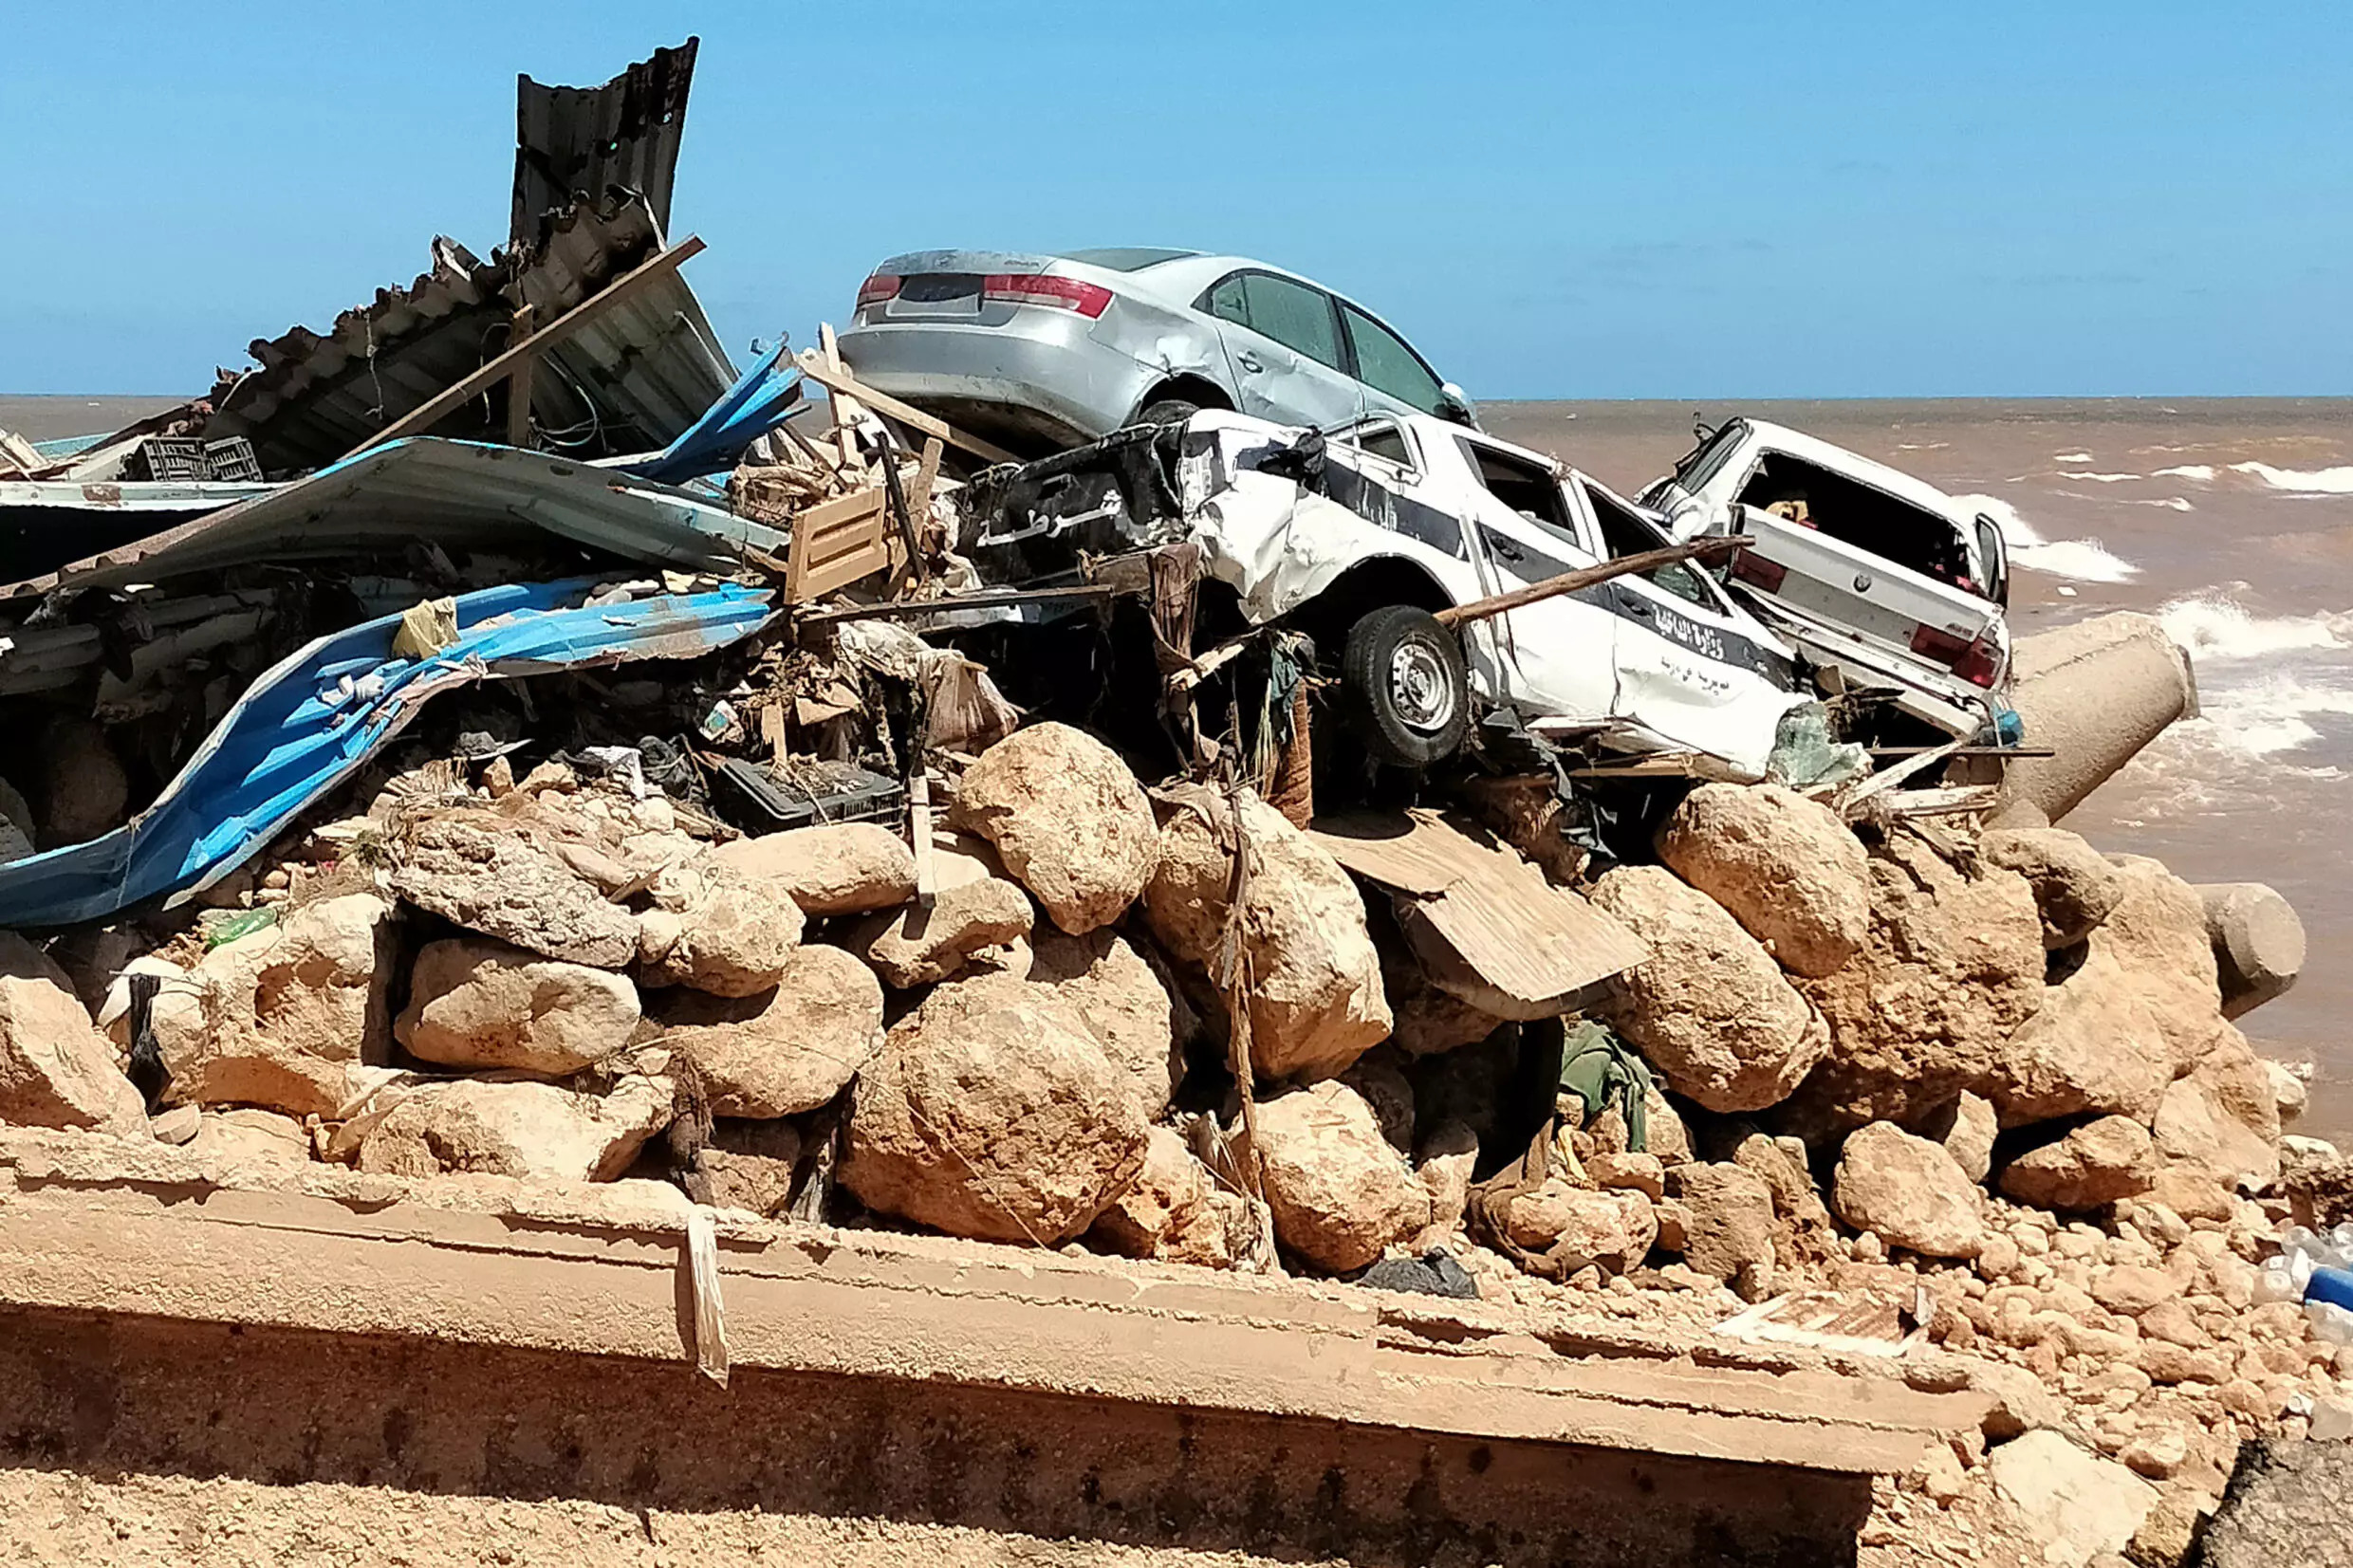 The floods were caused by hurricane-strength Storm Daniel, compounded by the poor infrastructure in Libya. Photo: AFP